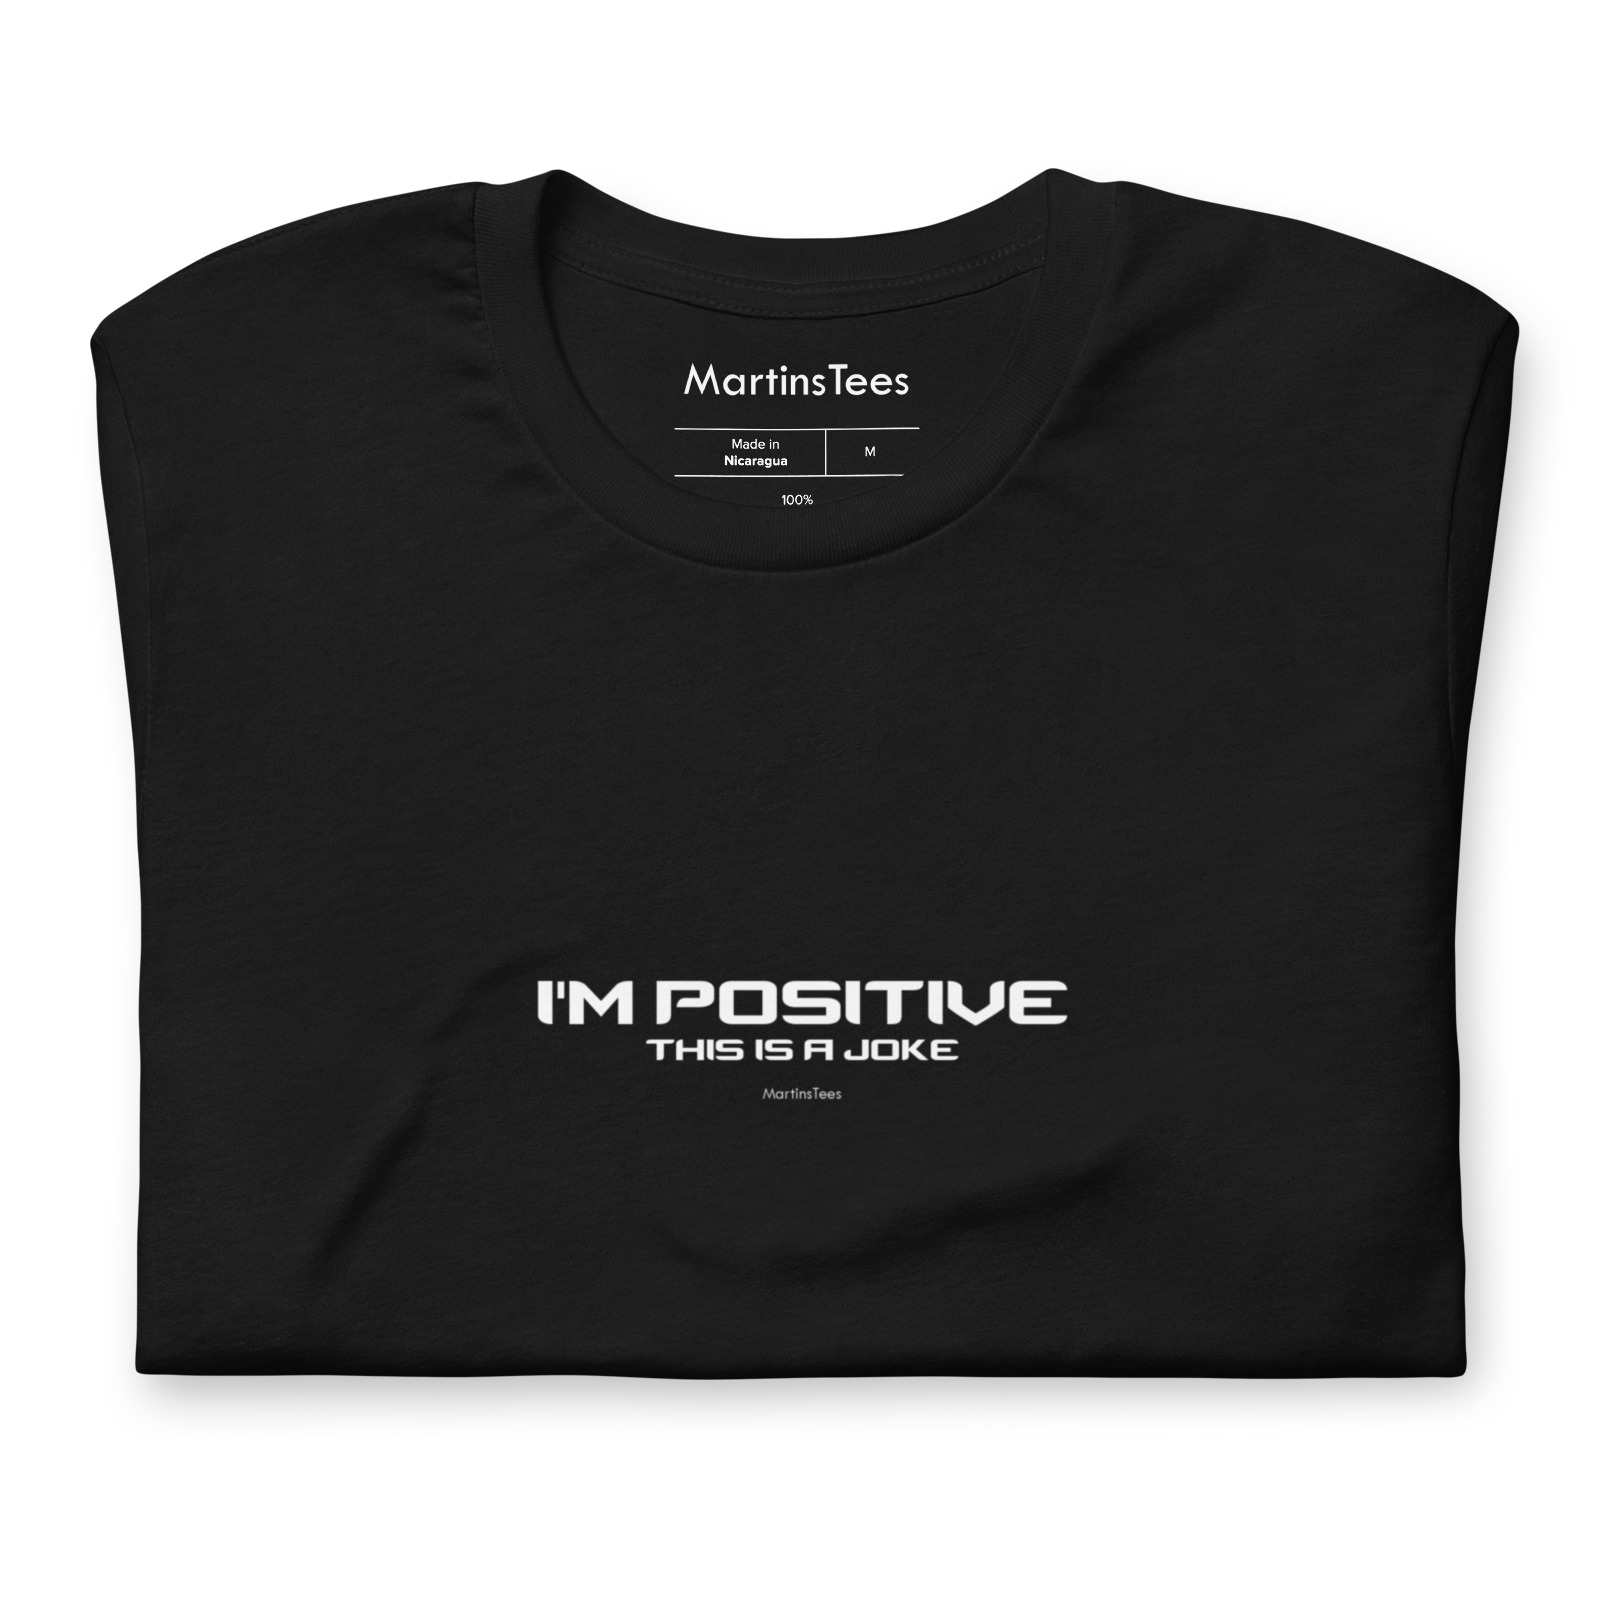 T-shirt: I'M POSITIVE - THIS IS A JOKE